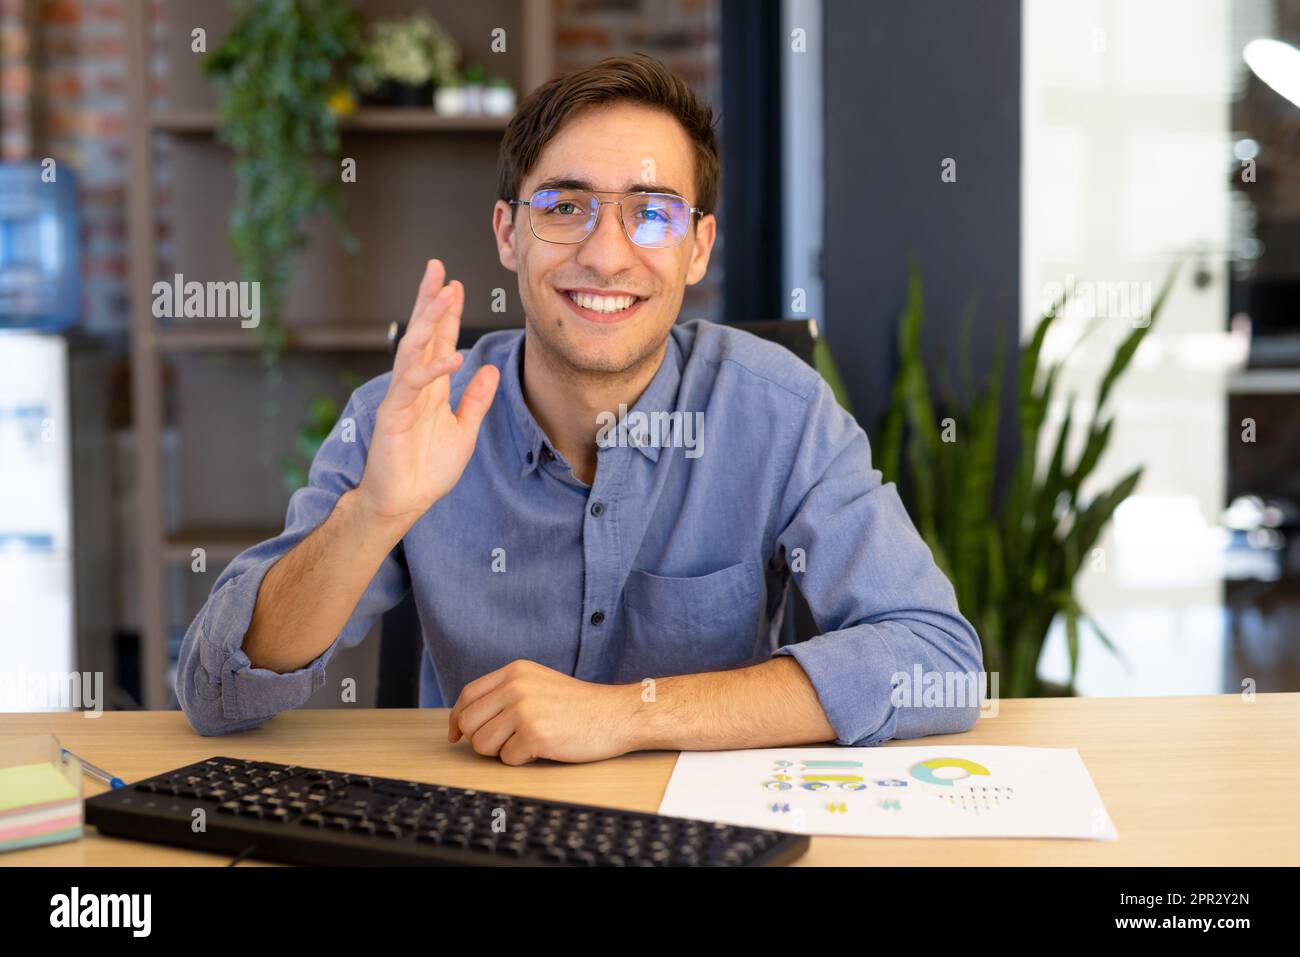 Portrait of happy caucasian casual businessman making video call, smiling and waving Stock Photo